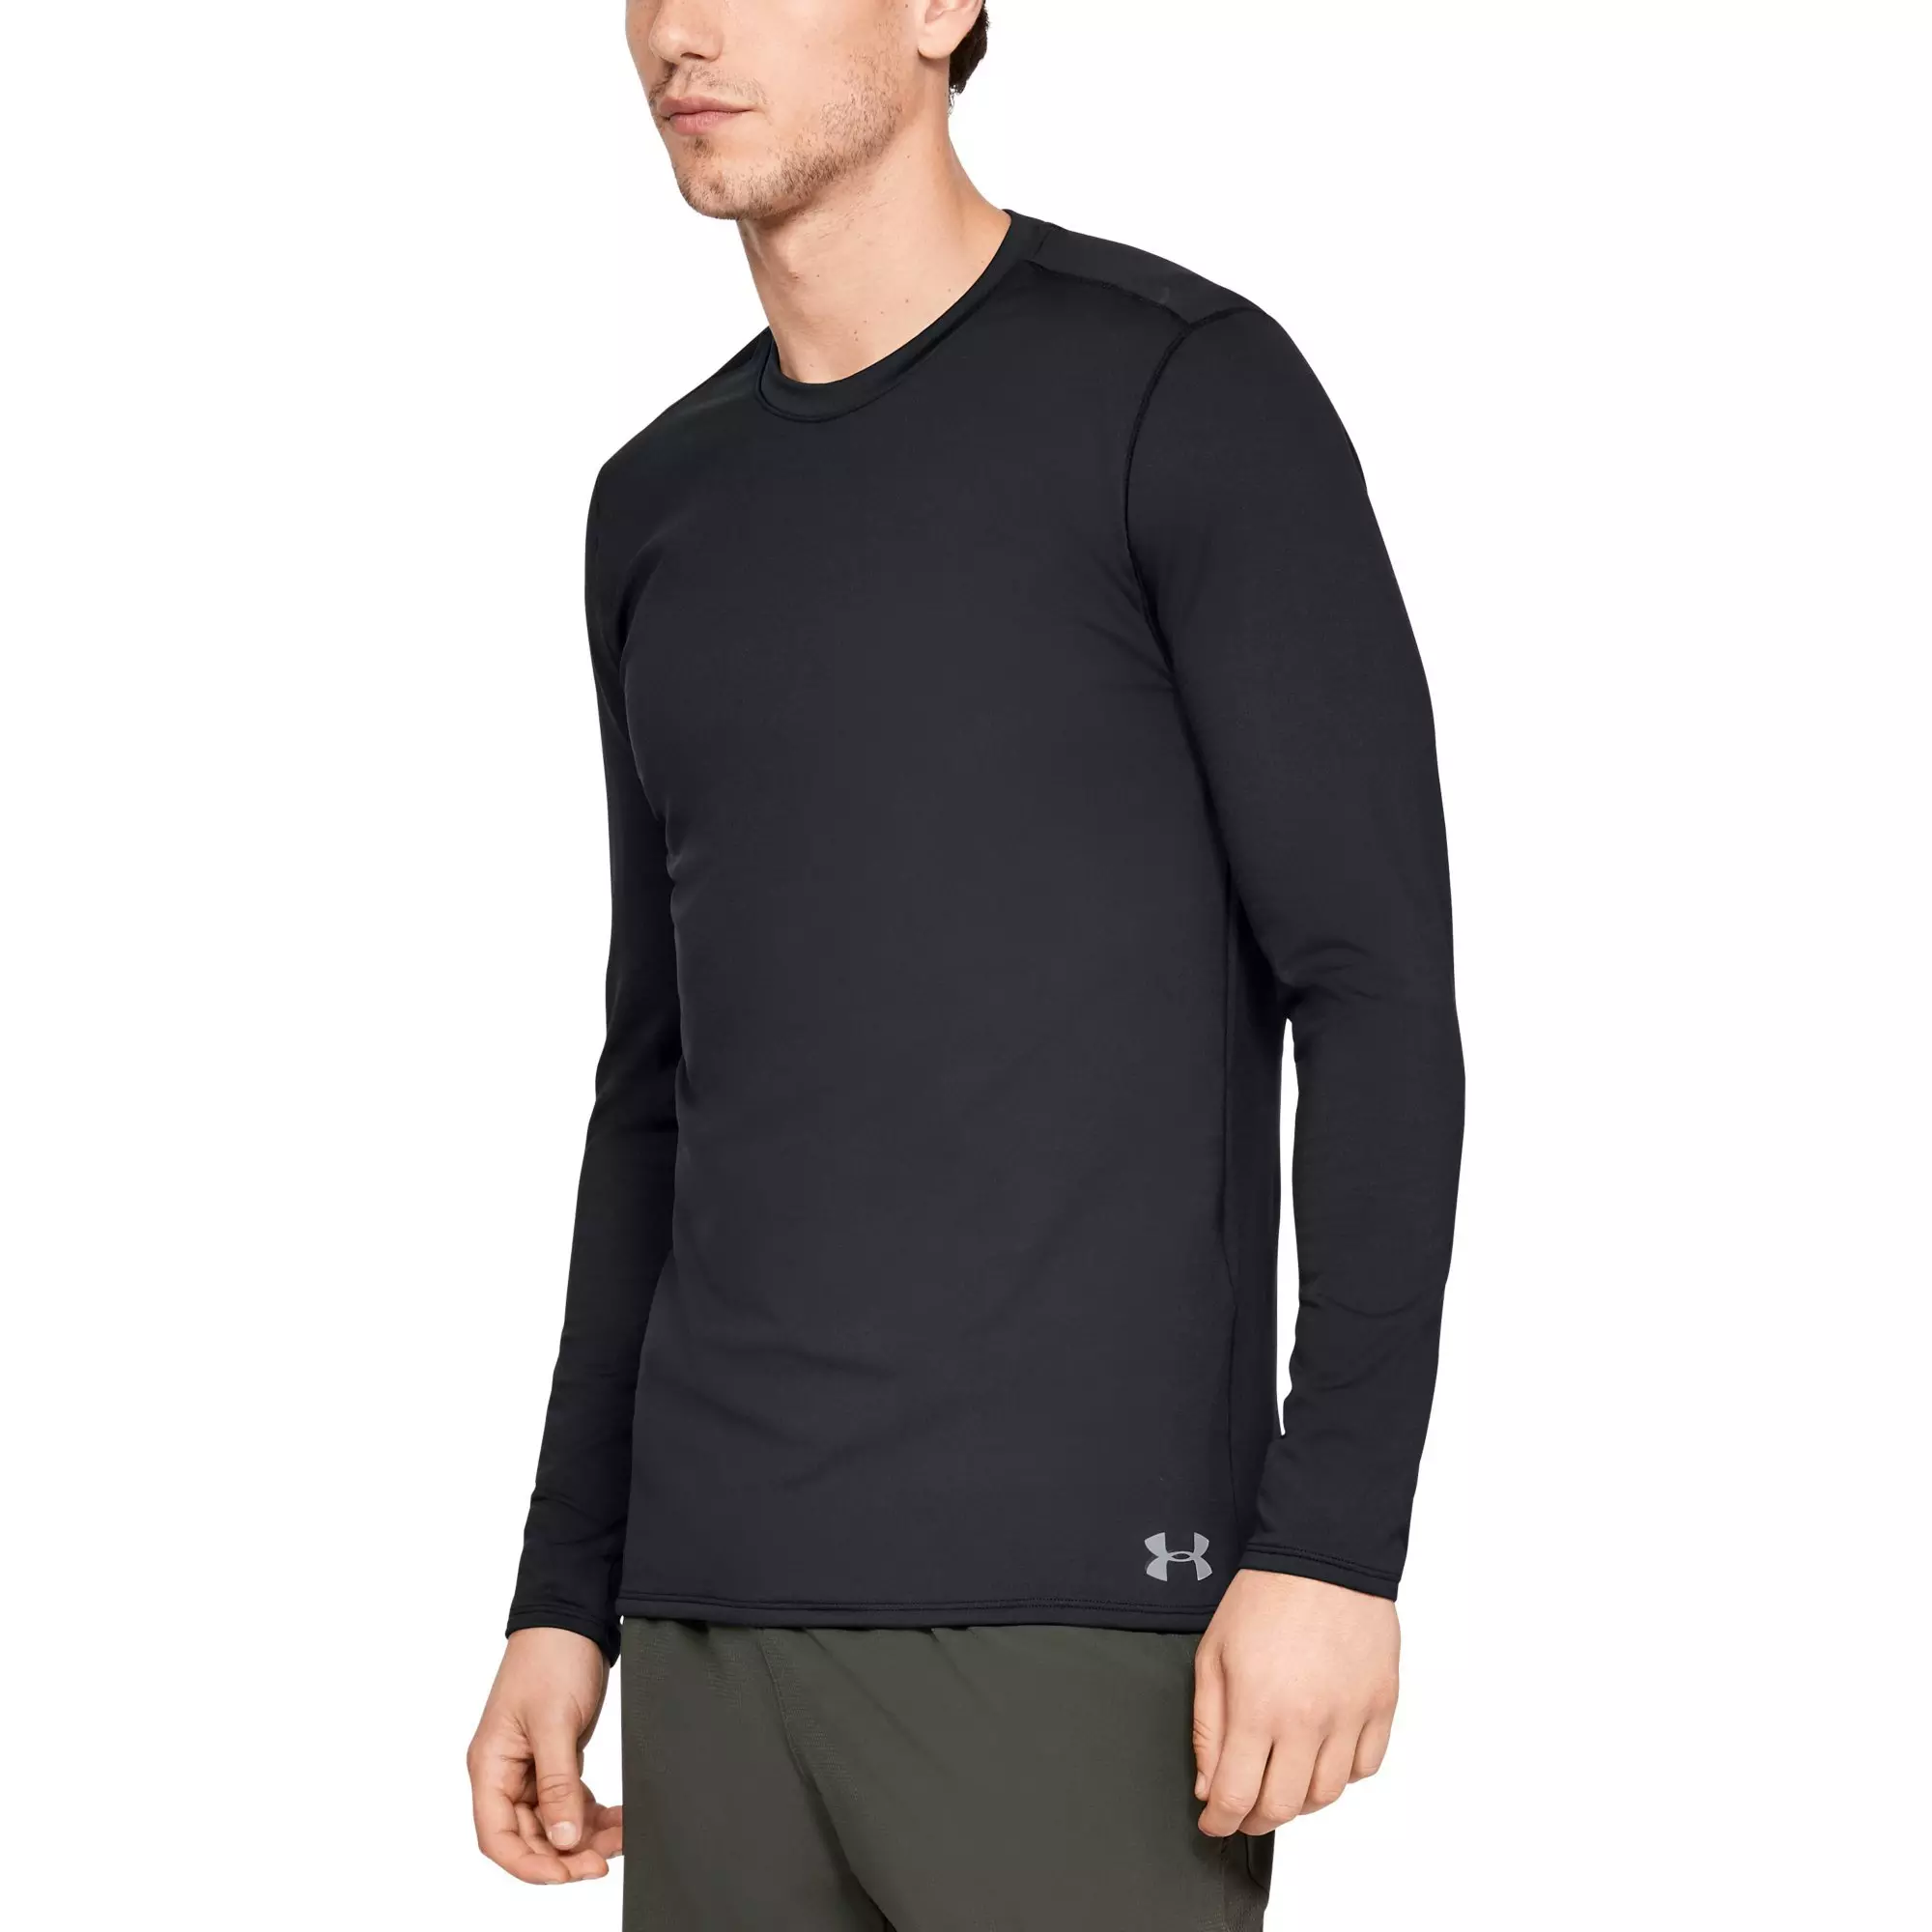 Under Armour Men's ColdGear® Armour Fitted Crew Long Sleeve Shirt